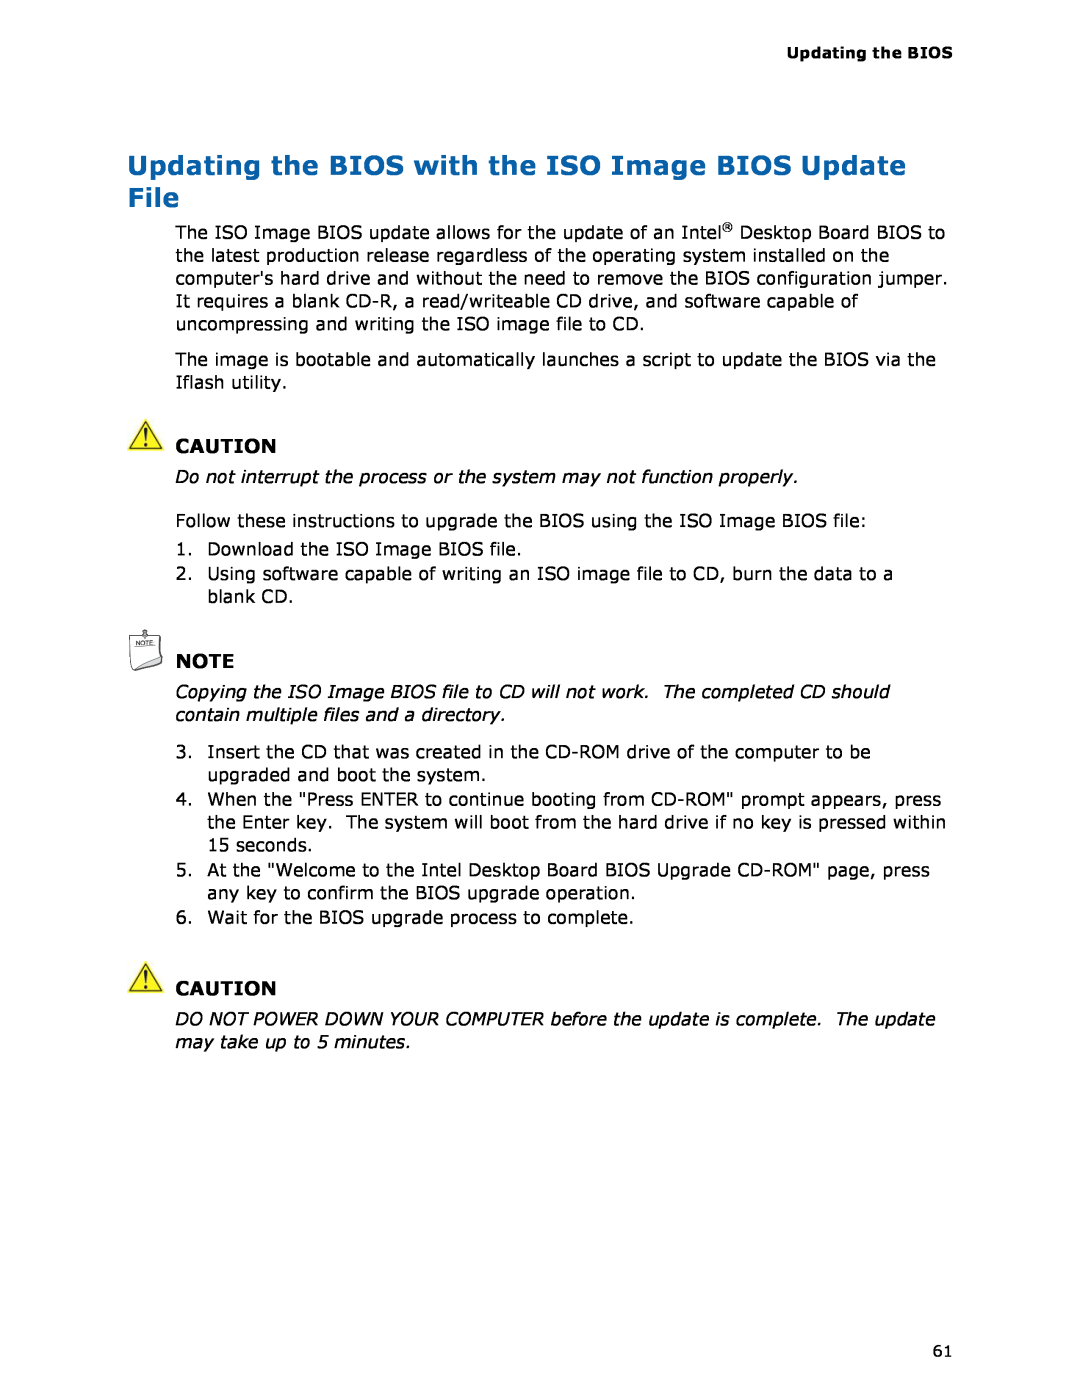 Intel BLKDH57JG manual Updating the BIOS with the ISO Image BIOS Update File 